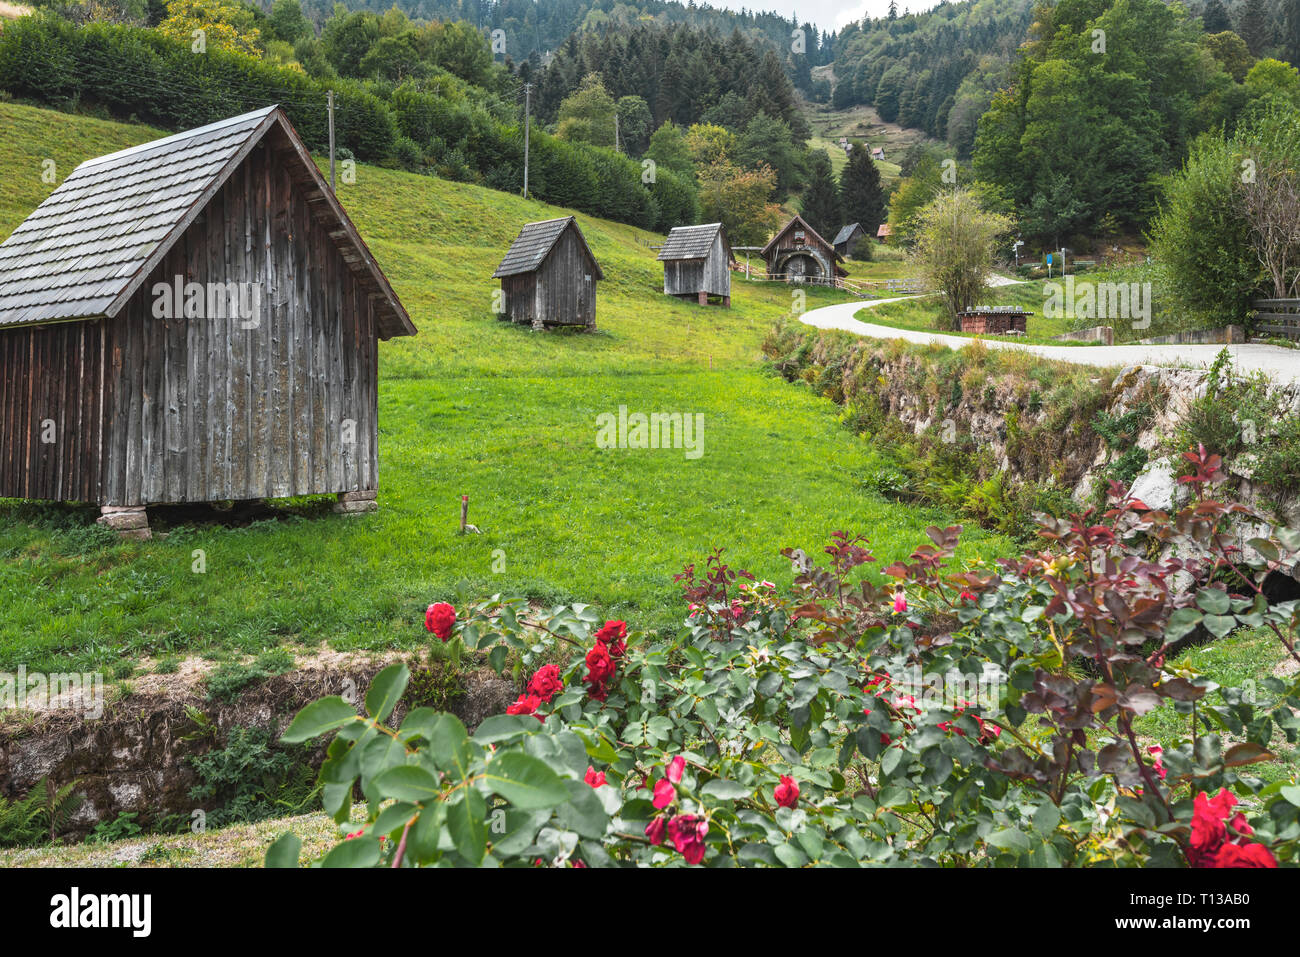 hay huts of the village Bermersbach, community Forbach, Murg valley in the Northern Black Forest, Germany, cultural landscape at the hillside Stock Photo